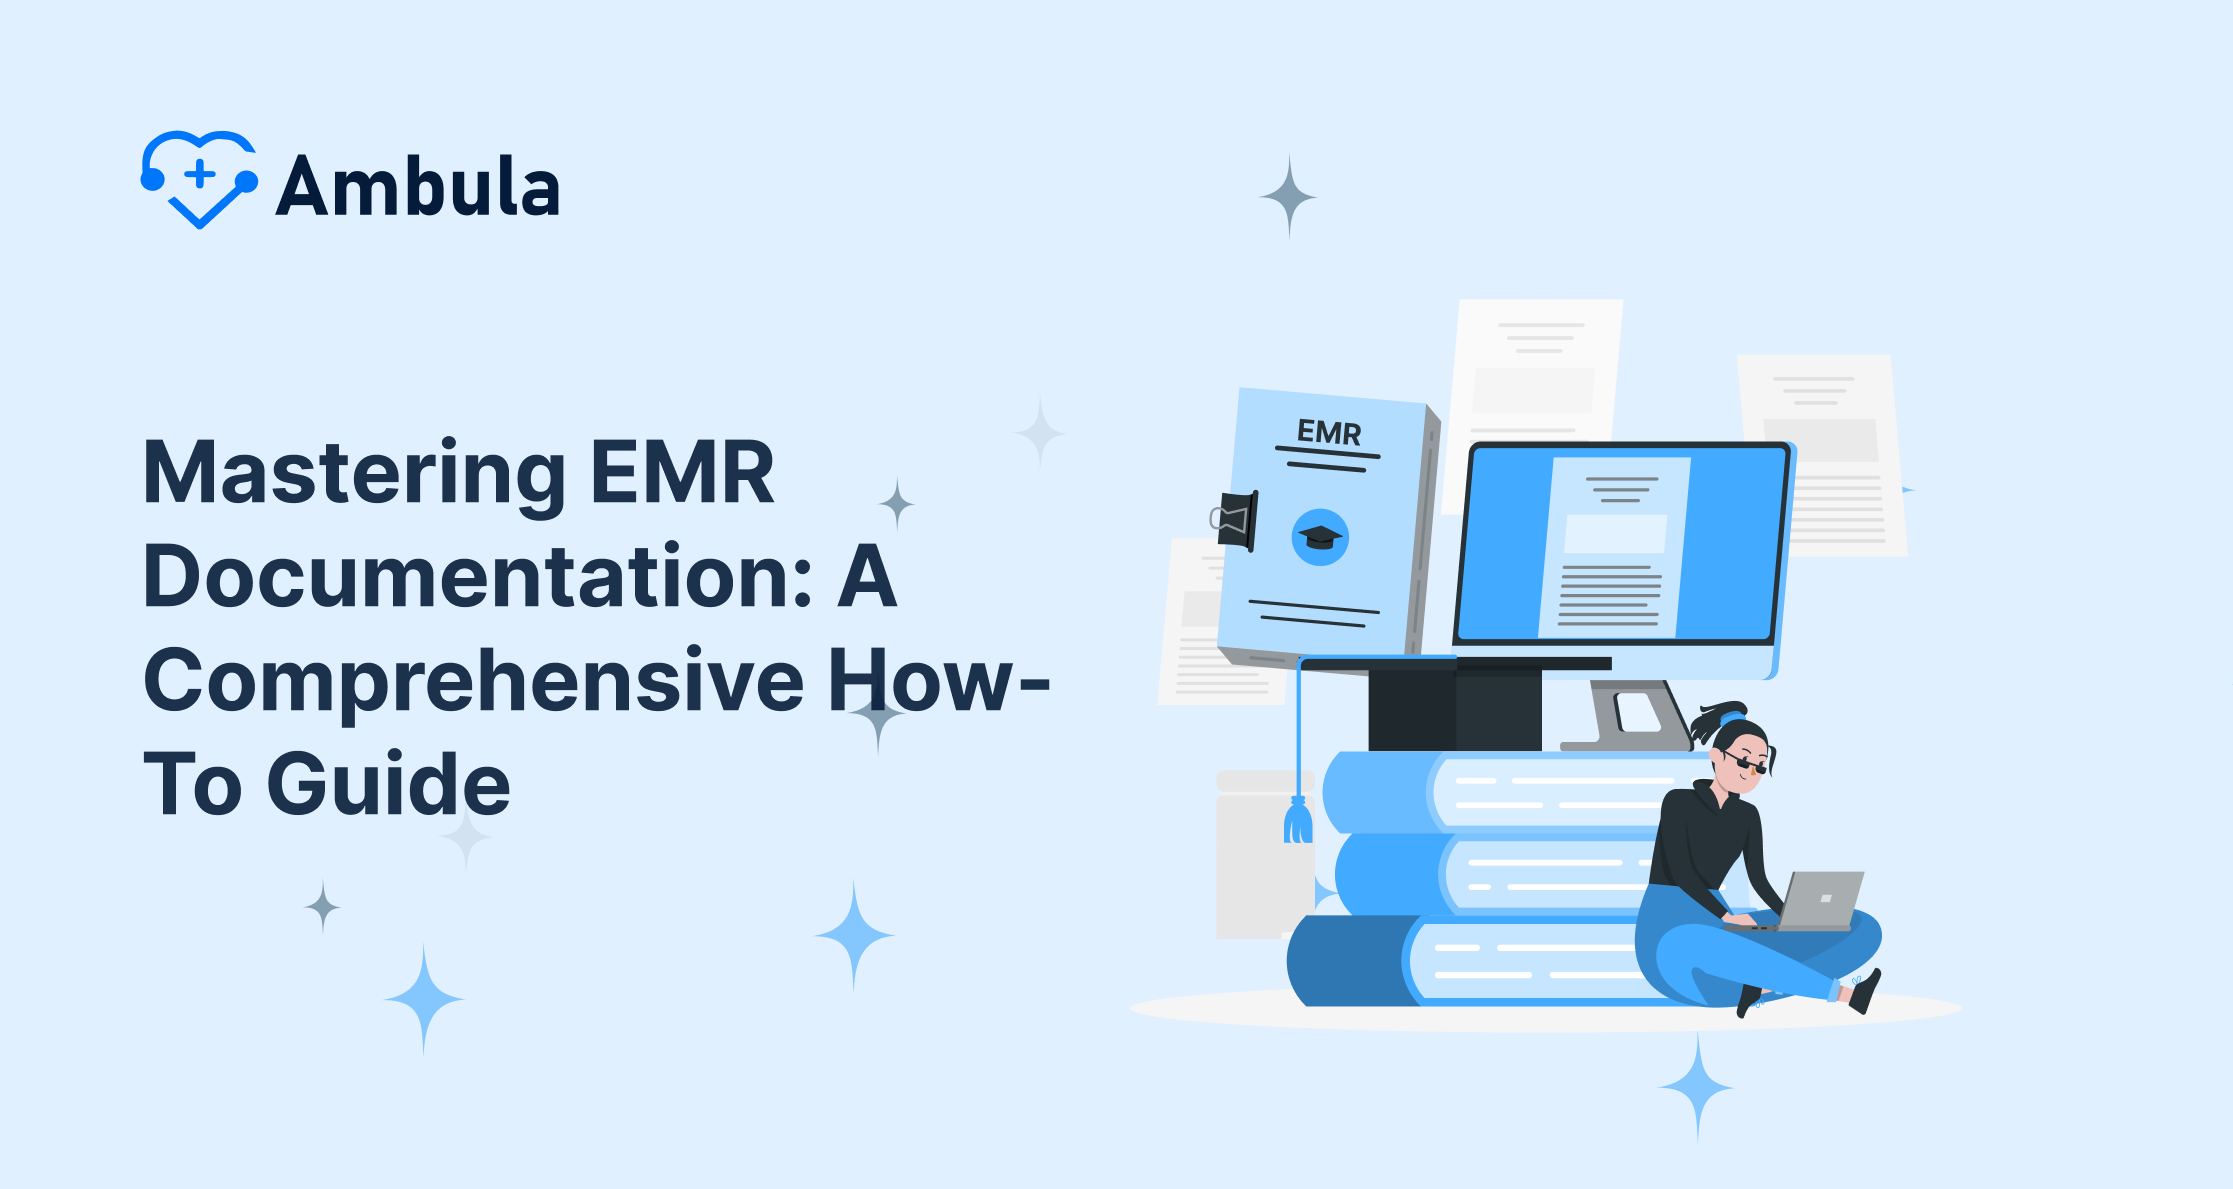 Mastering EMR Documentation: An In-Depth How-To Guide